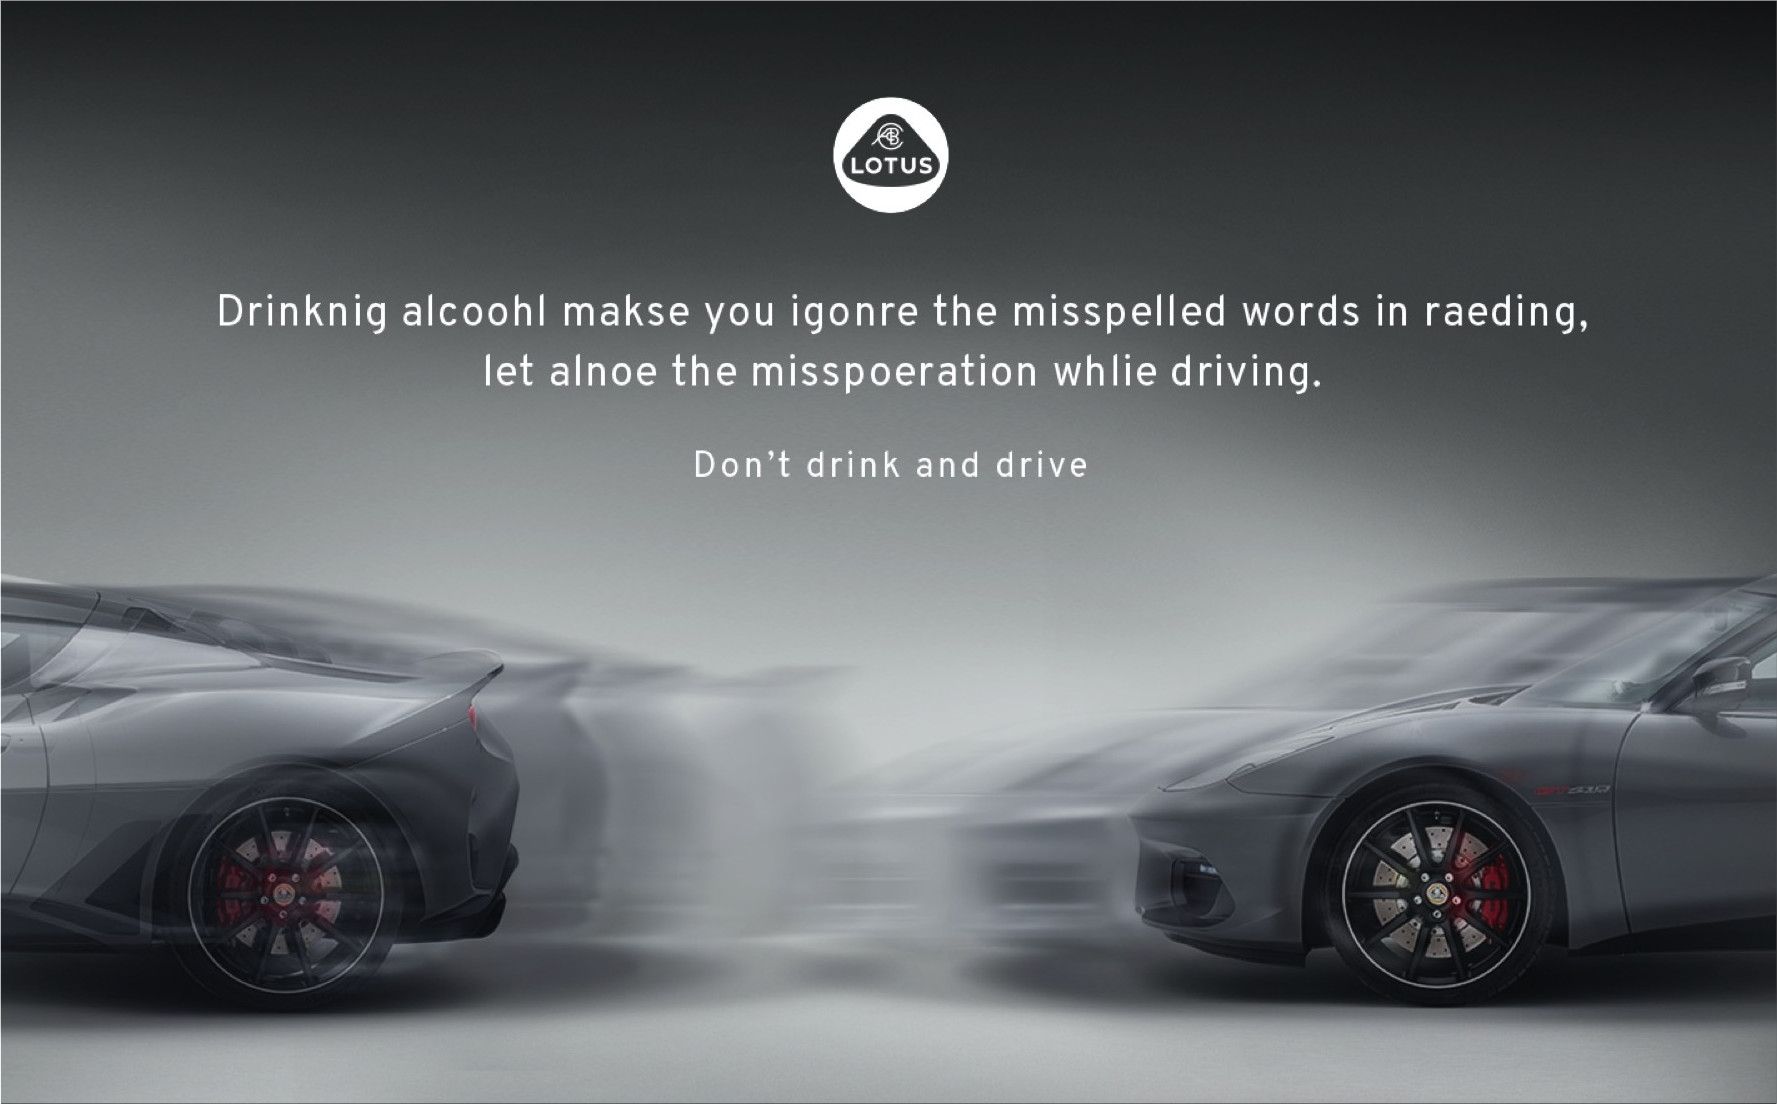 "Don't drink and drive" Lotus print ads | Spare Wheel